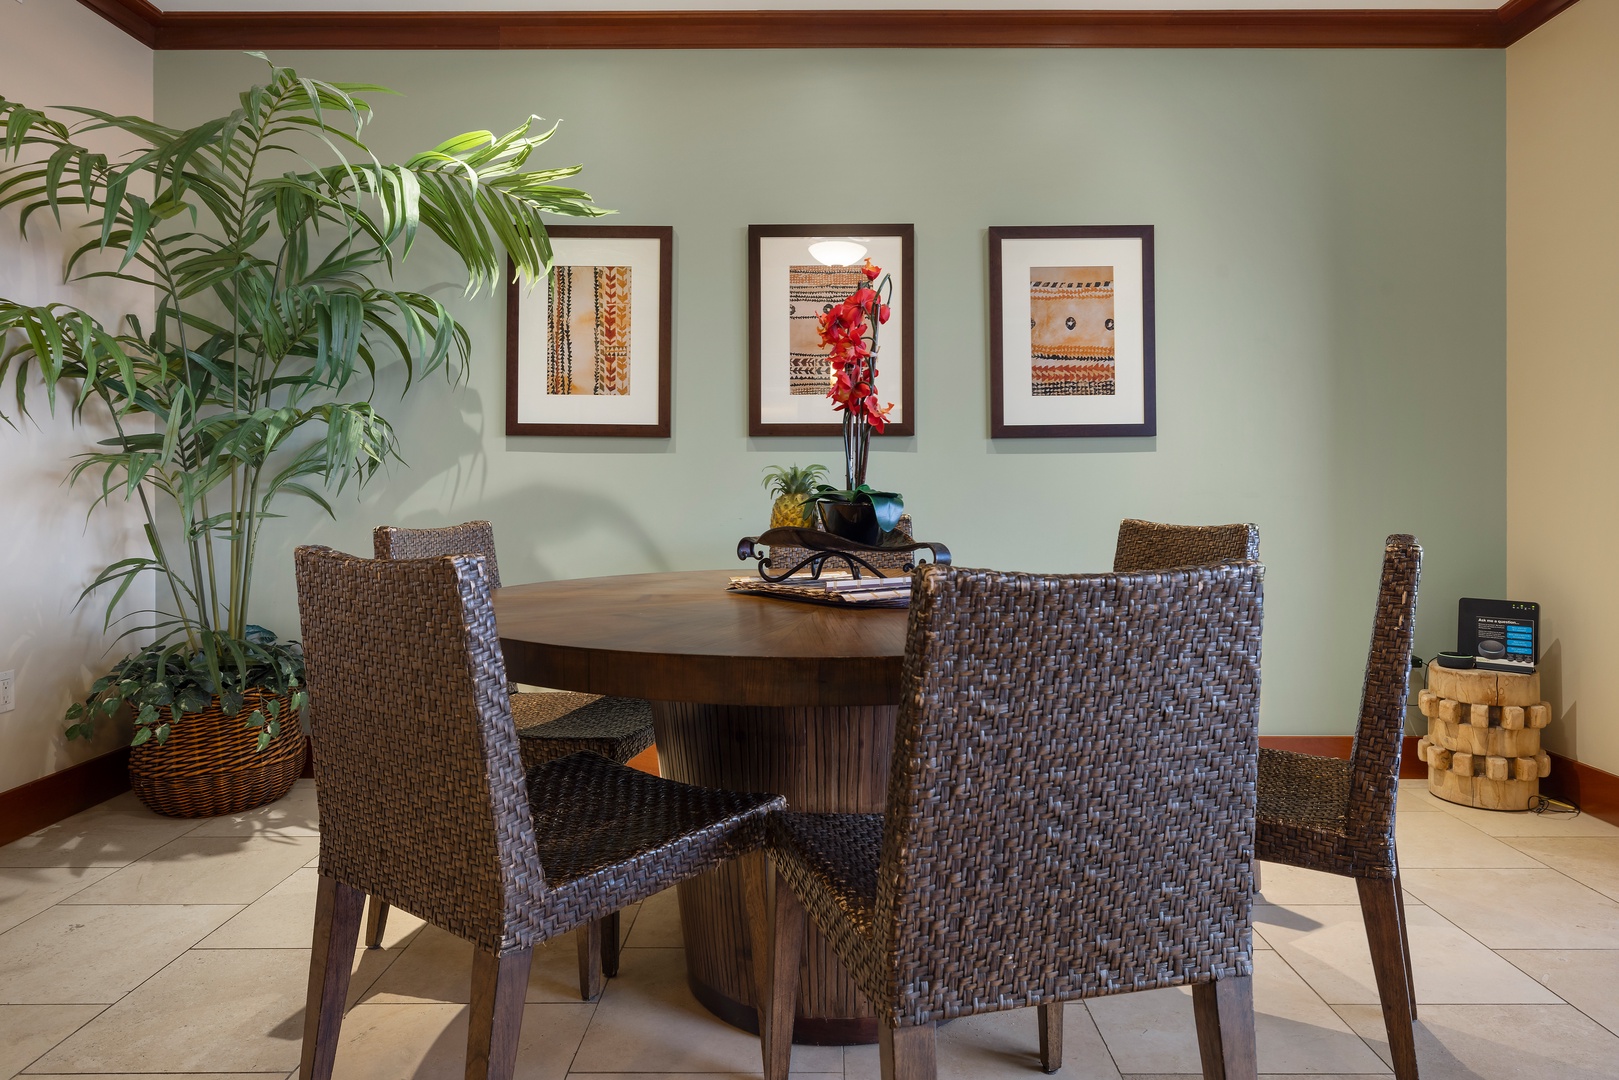 Kapolei Vacation Rentals, Ko Olina Beach Villas O1006 - Dining area with vibrant artwork, and a large plant adding a touch of greenery.